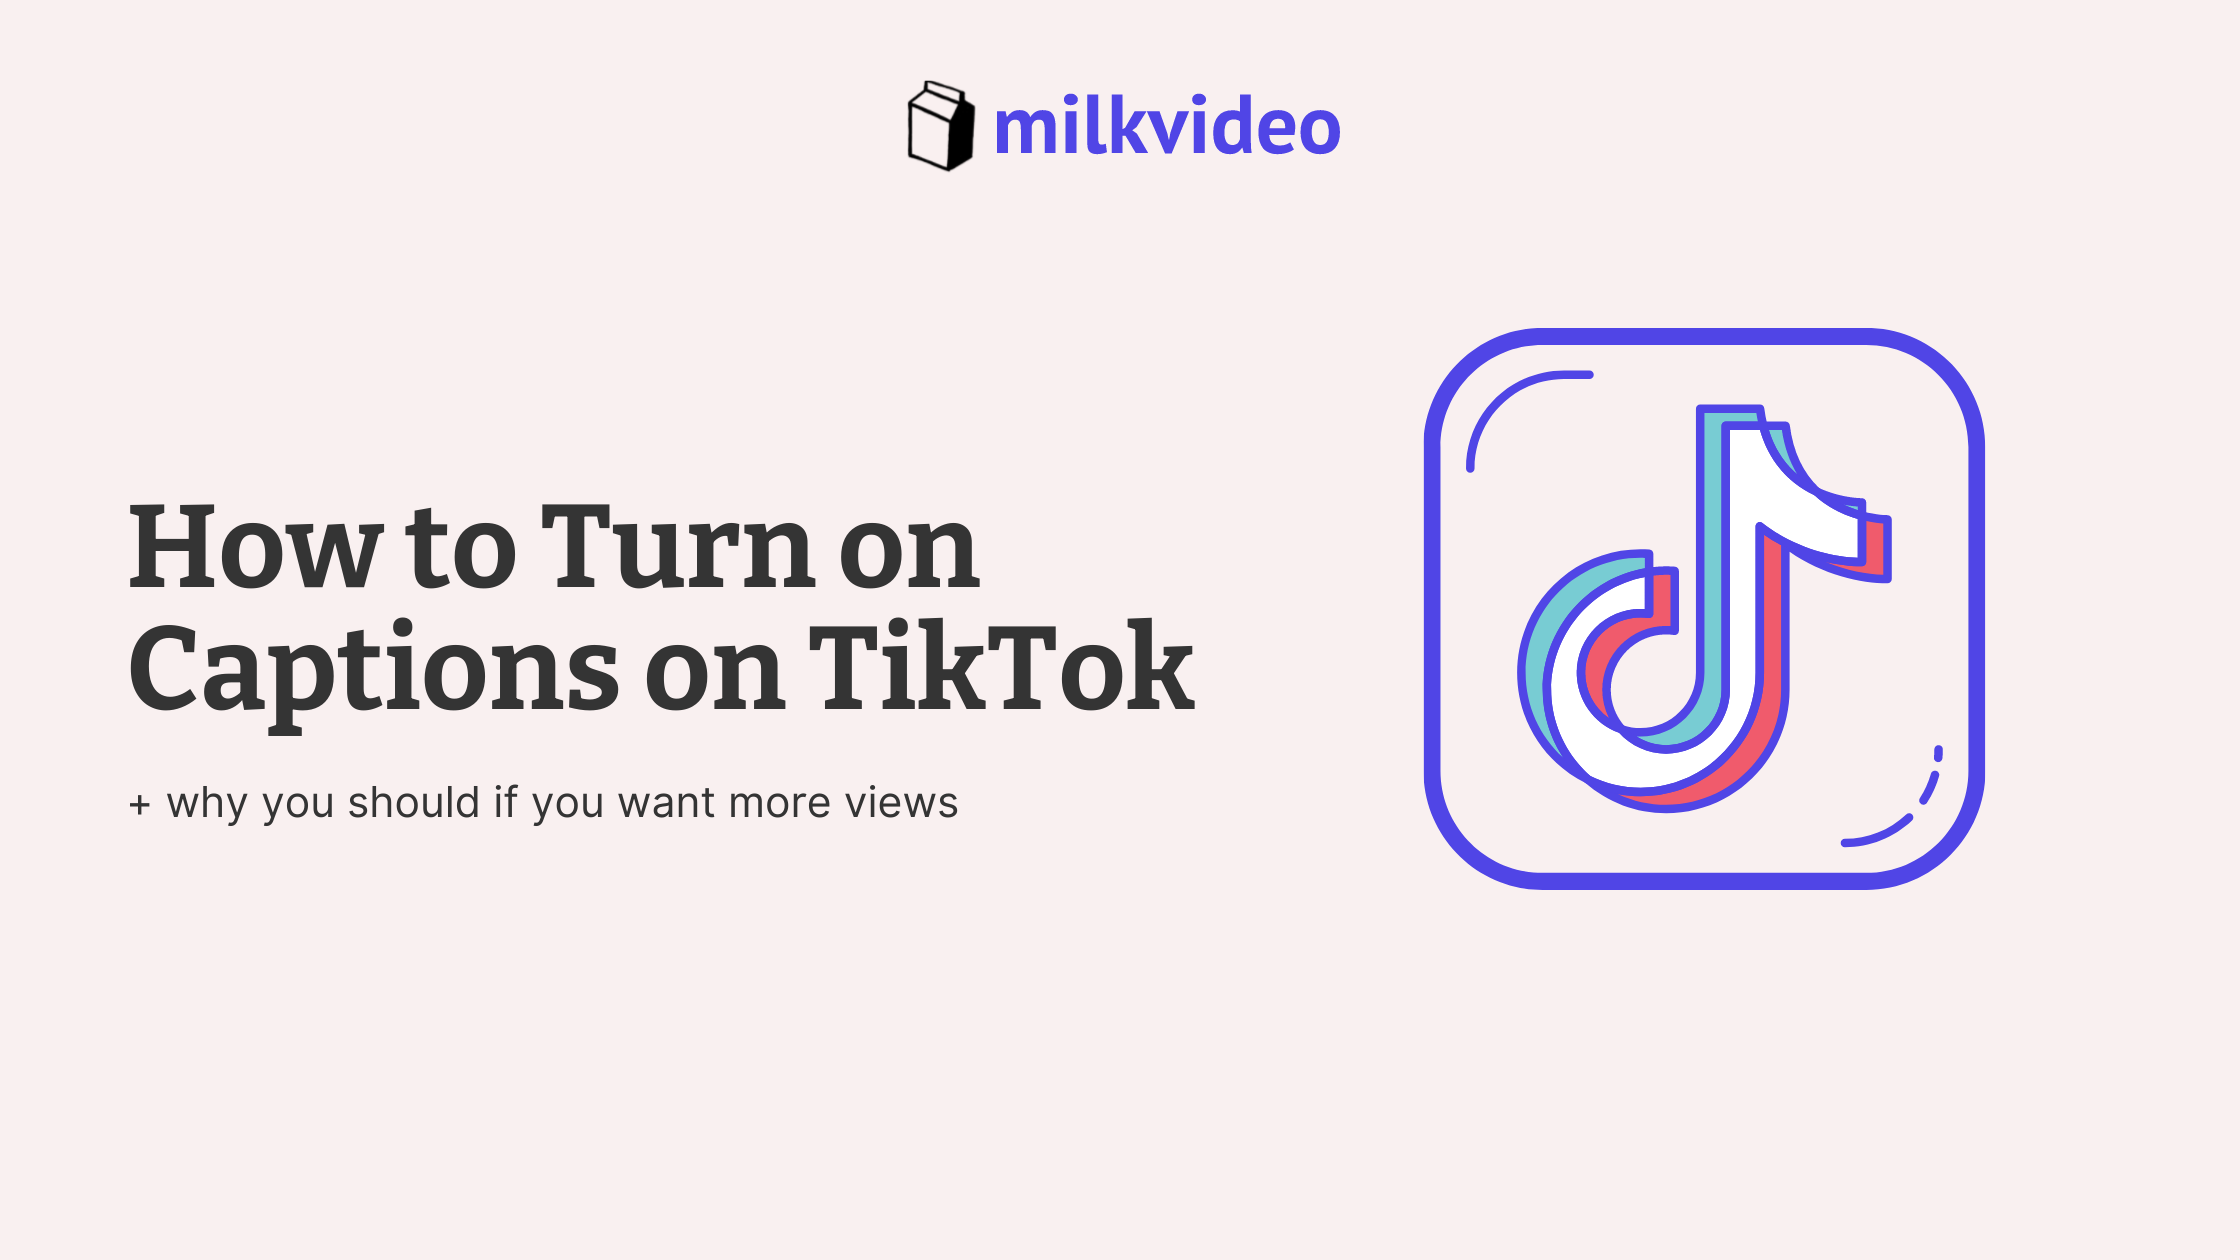 How to turn on captions on tik tok